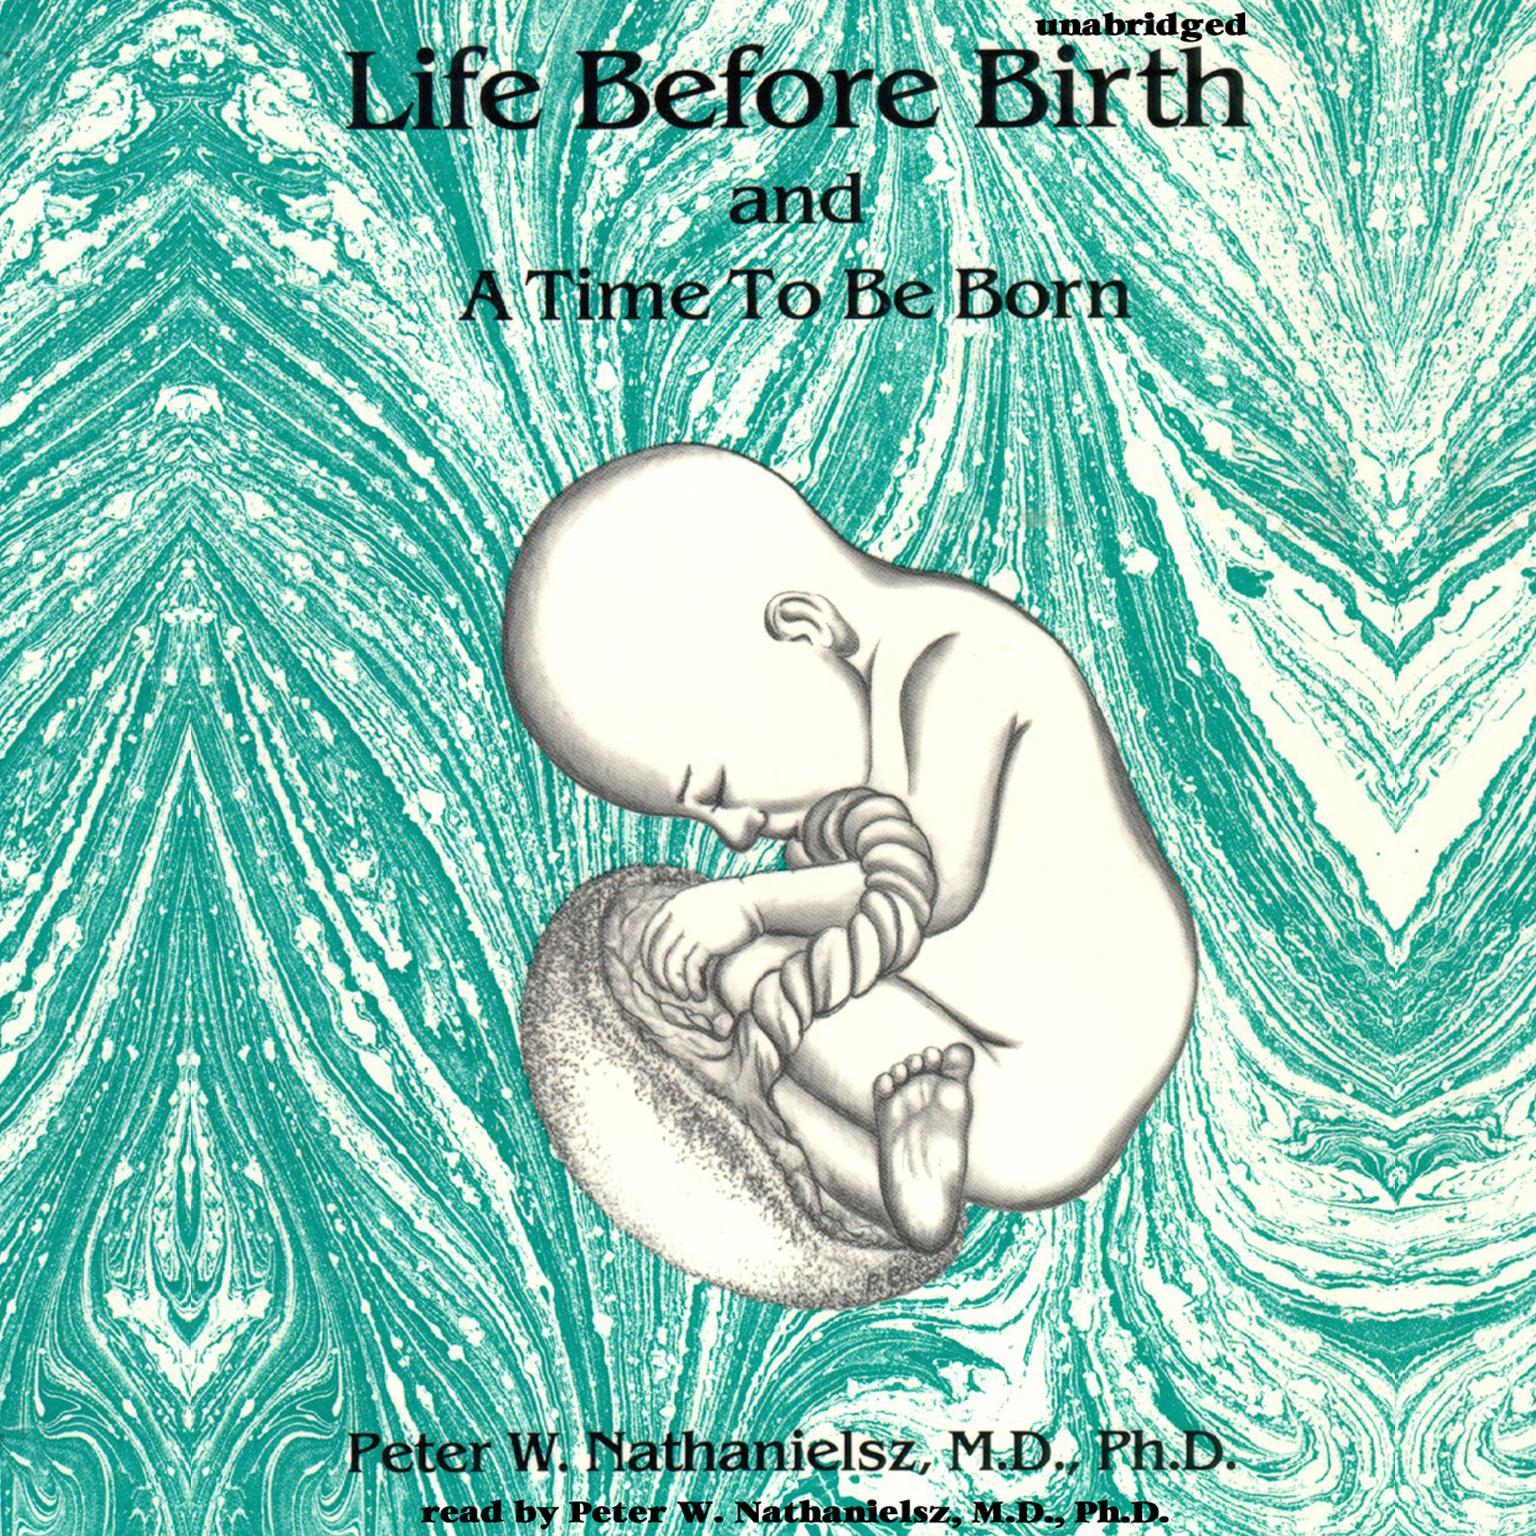 Life before Birth and A Time to Be Born Audiobook, by Peter W. Nathanielsz